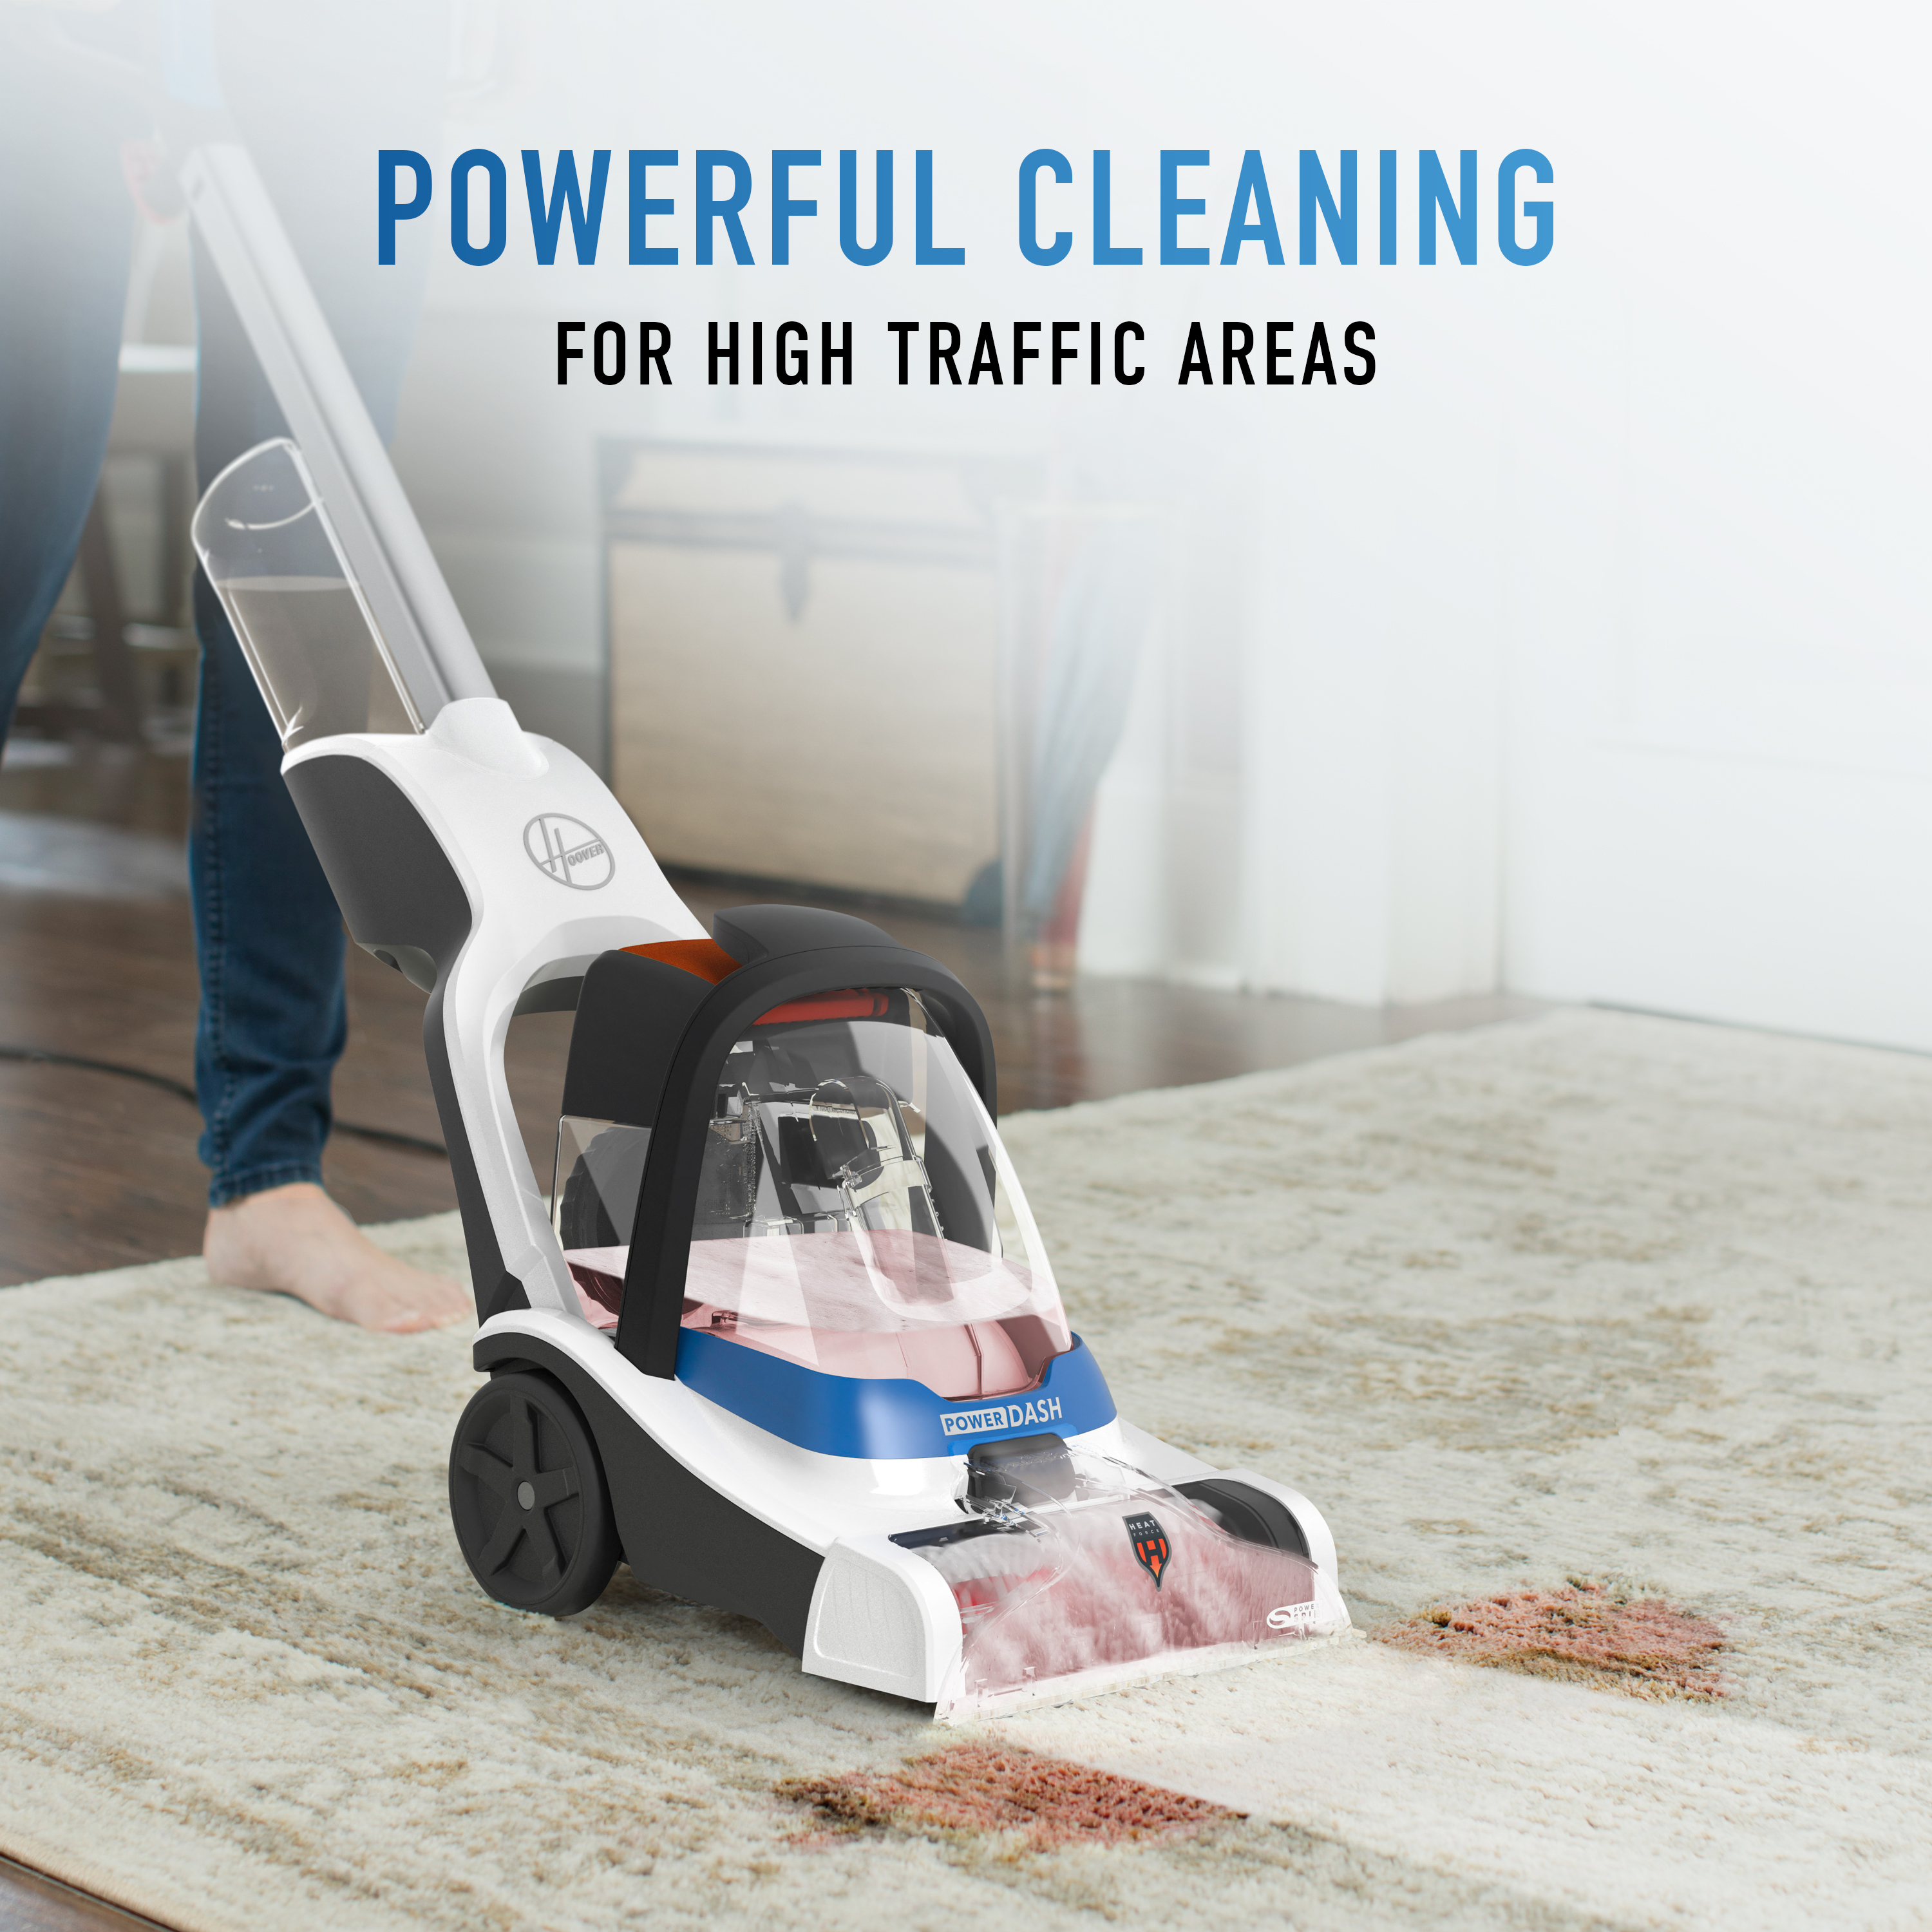 Hoover PowerDash Pet, Upright Carpet Cleaner Machine with Clean Pack Carpet Cleaner Solution Pod Samples, FH50712 - image 7 of 17